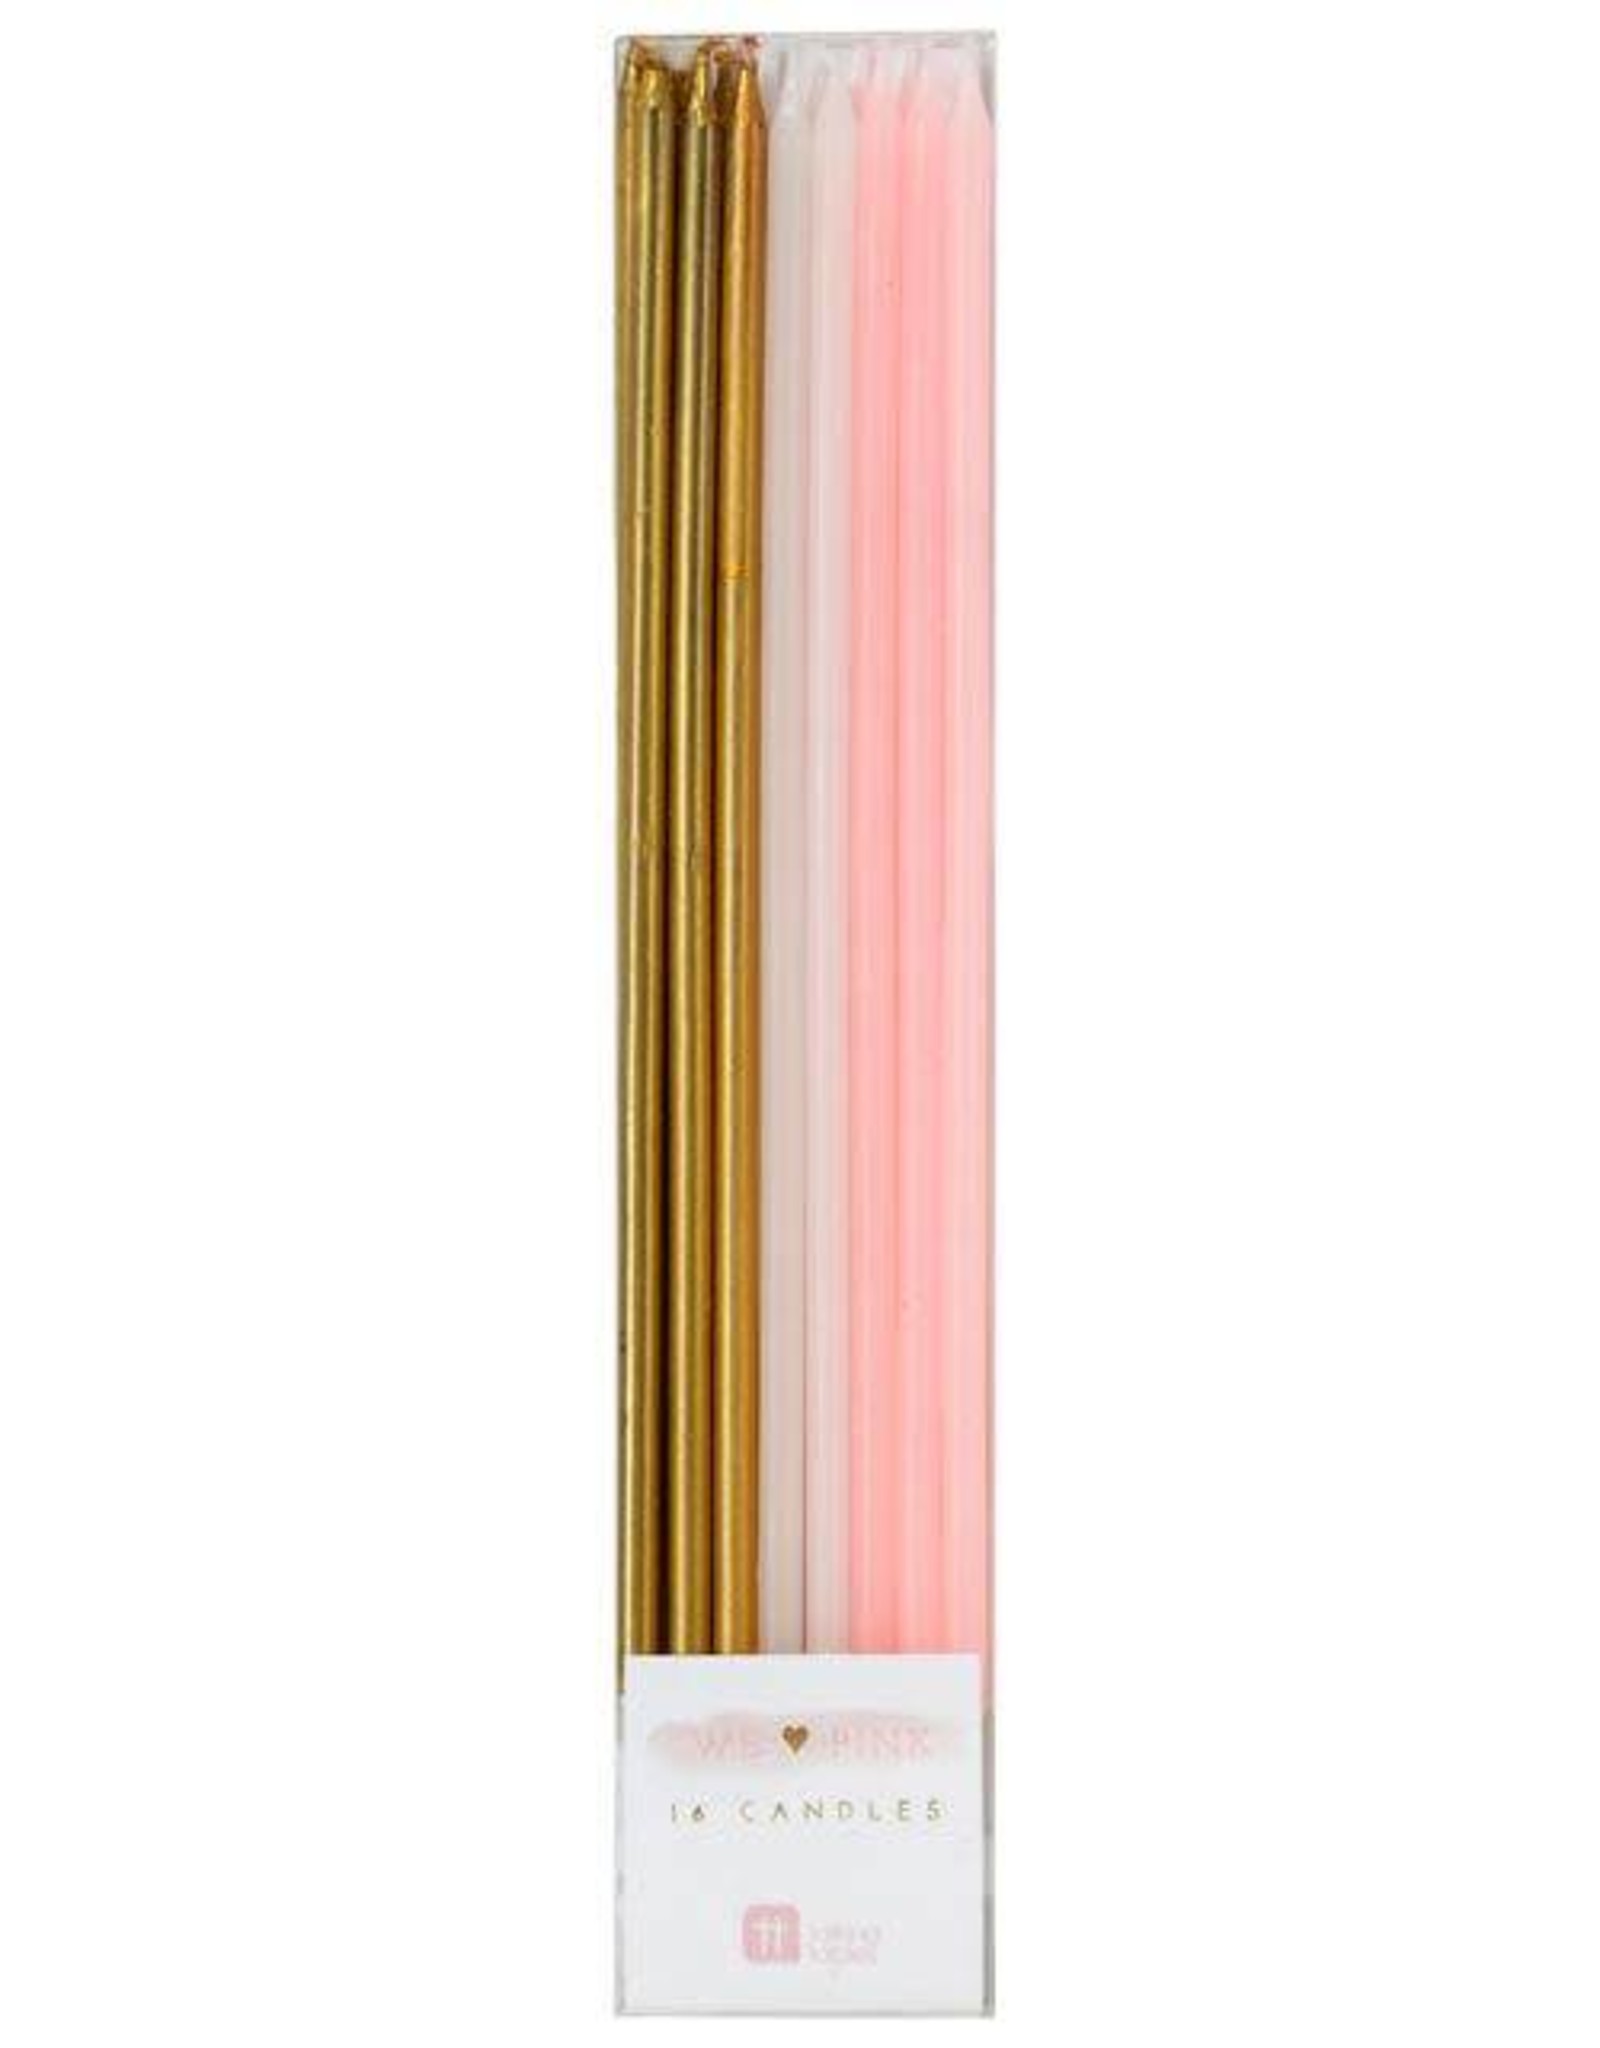 Long Thin Candles 16 Pack